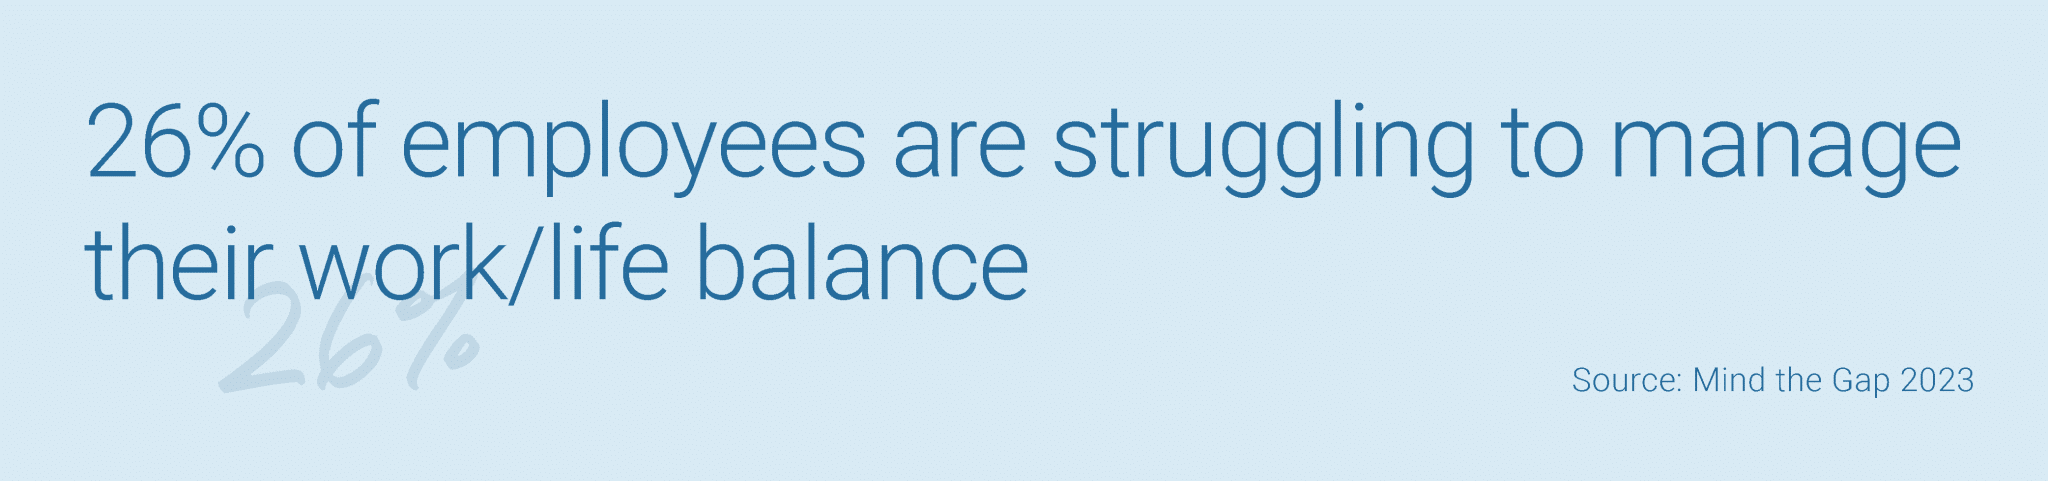 26% of employees are struggling to manage their work/life balance 